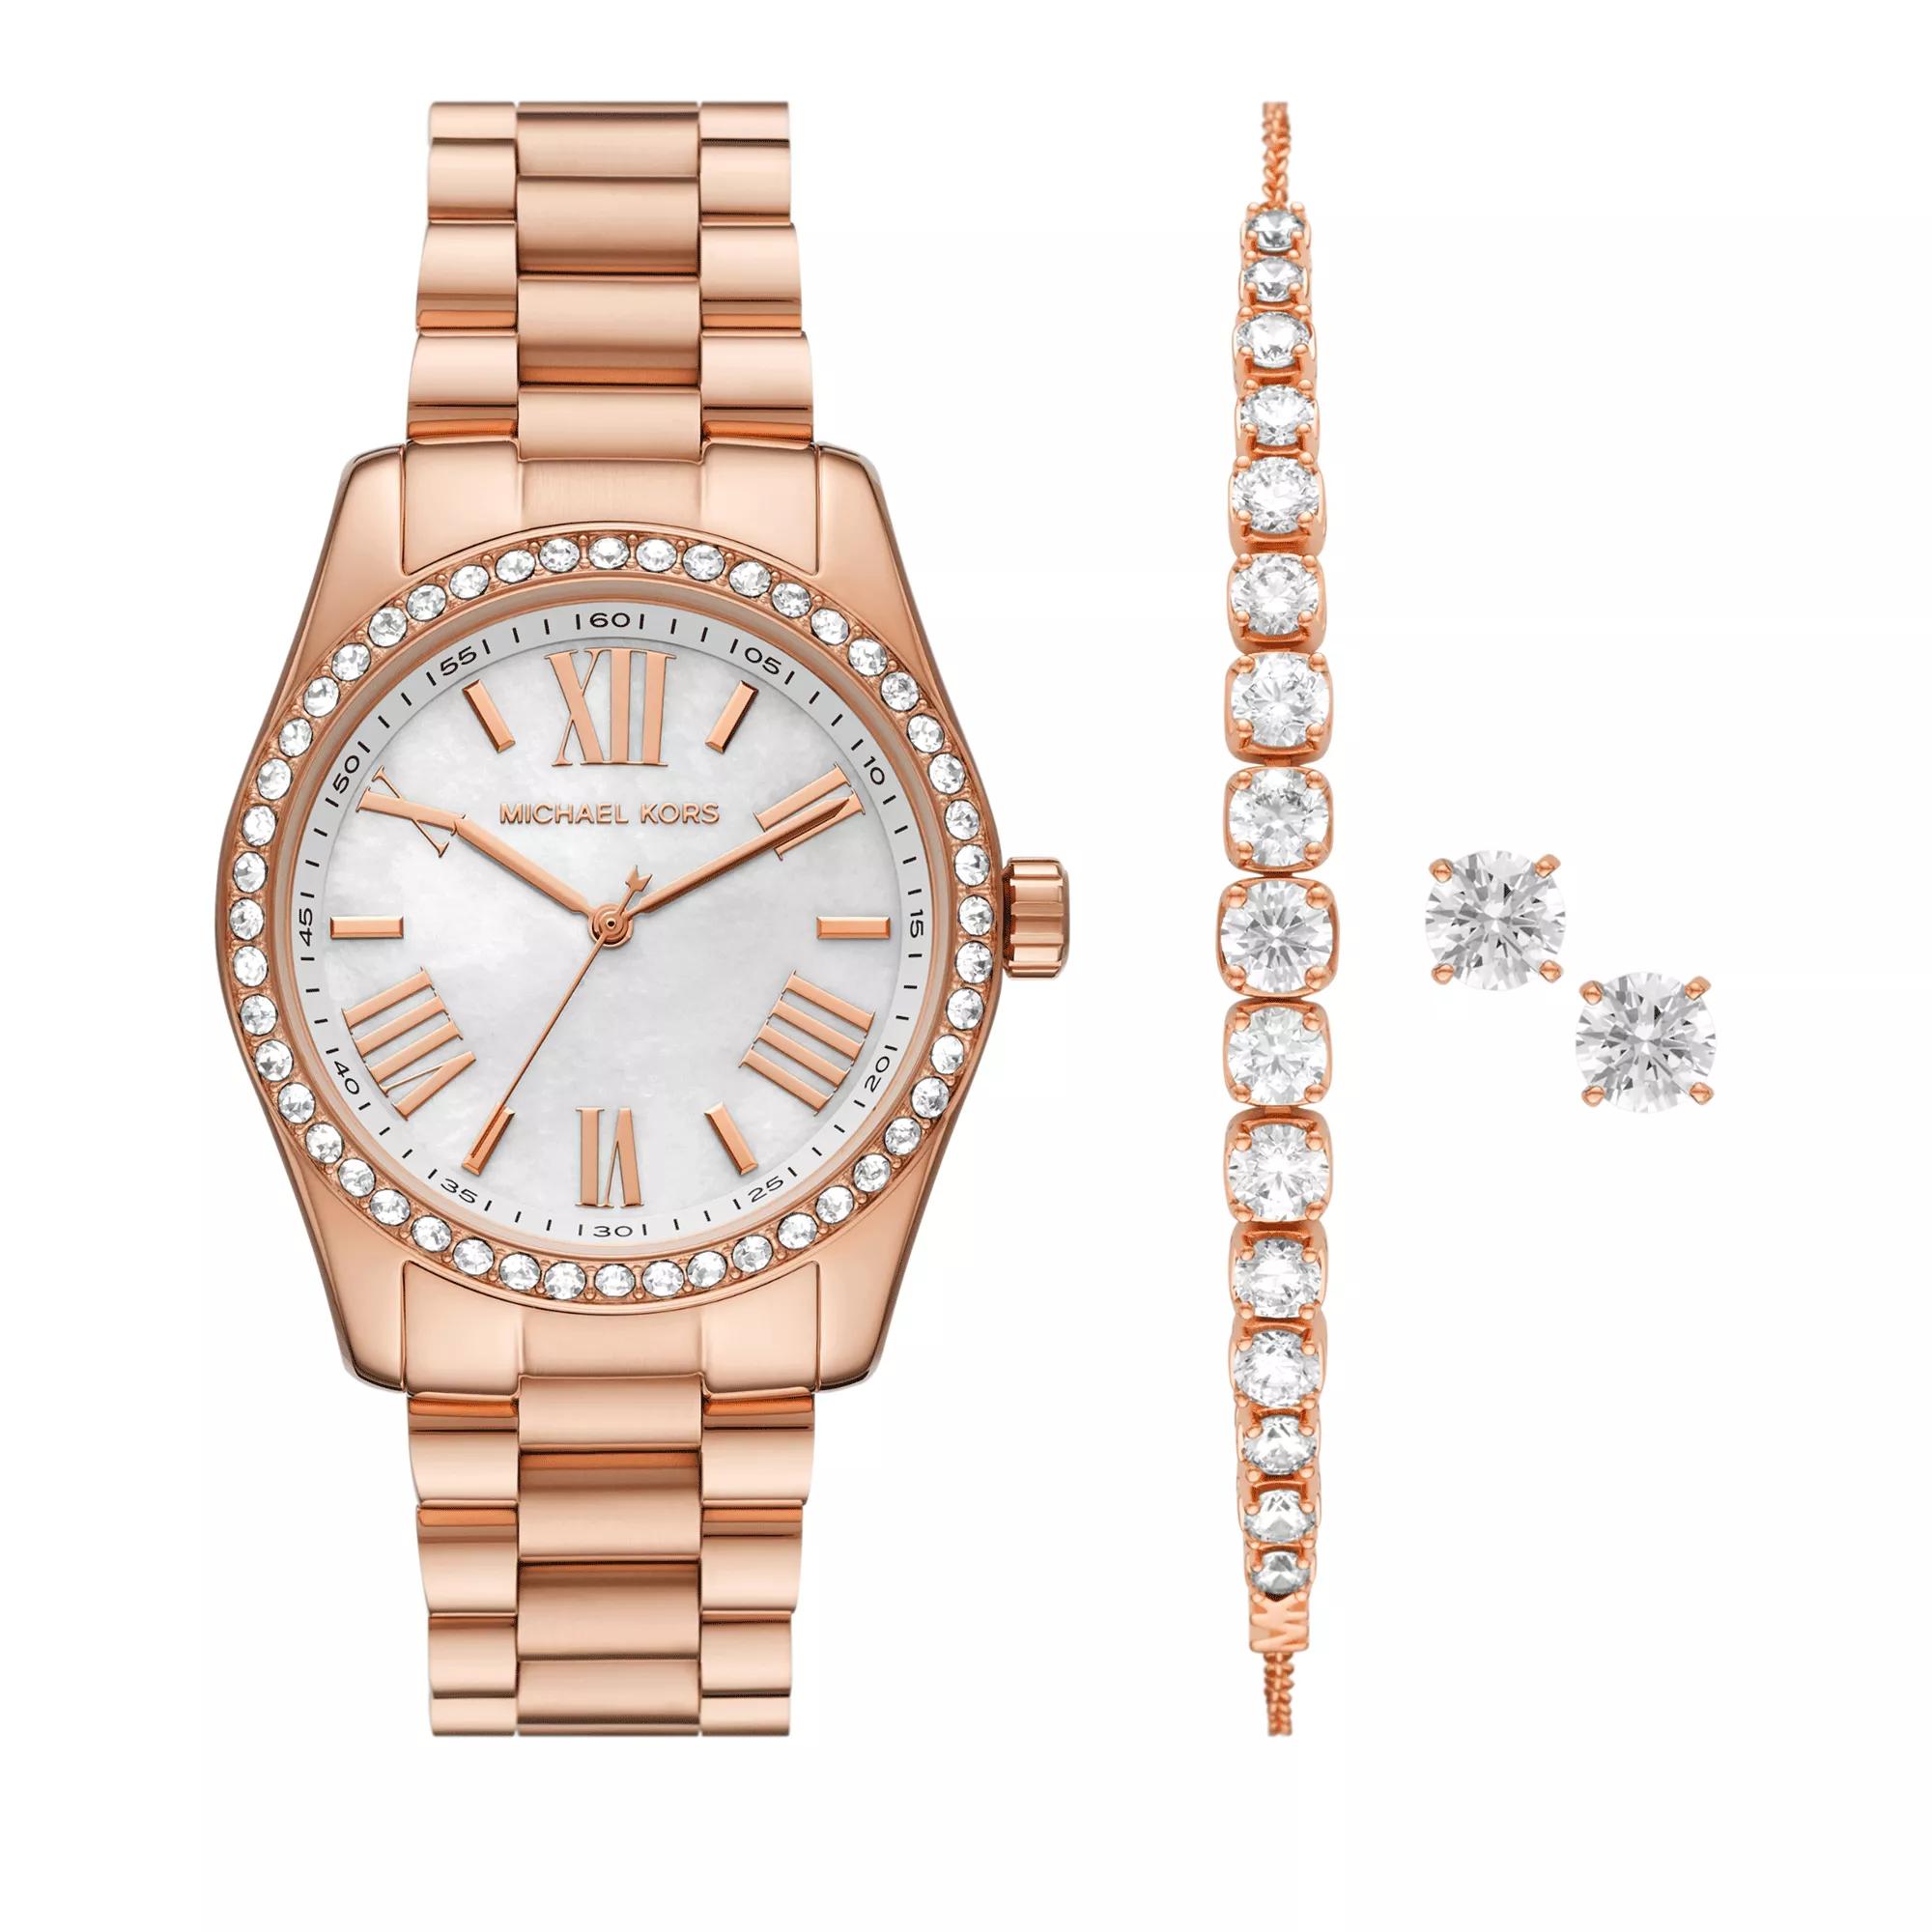 Michael Kors Lexington Three-Hand Stainless Steel Watch and Jewellery Rose  Gold | Quarz-Uhr